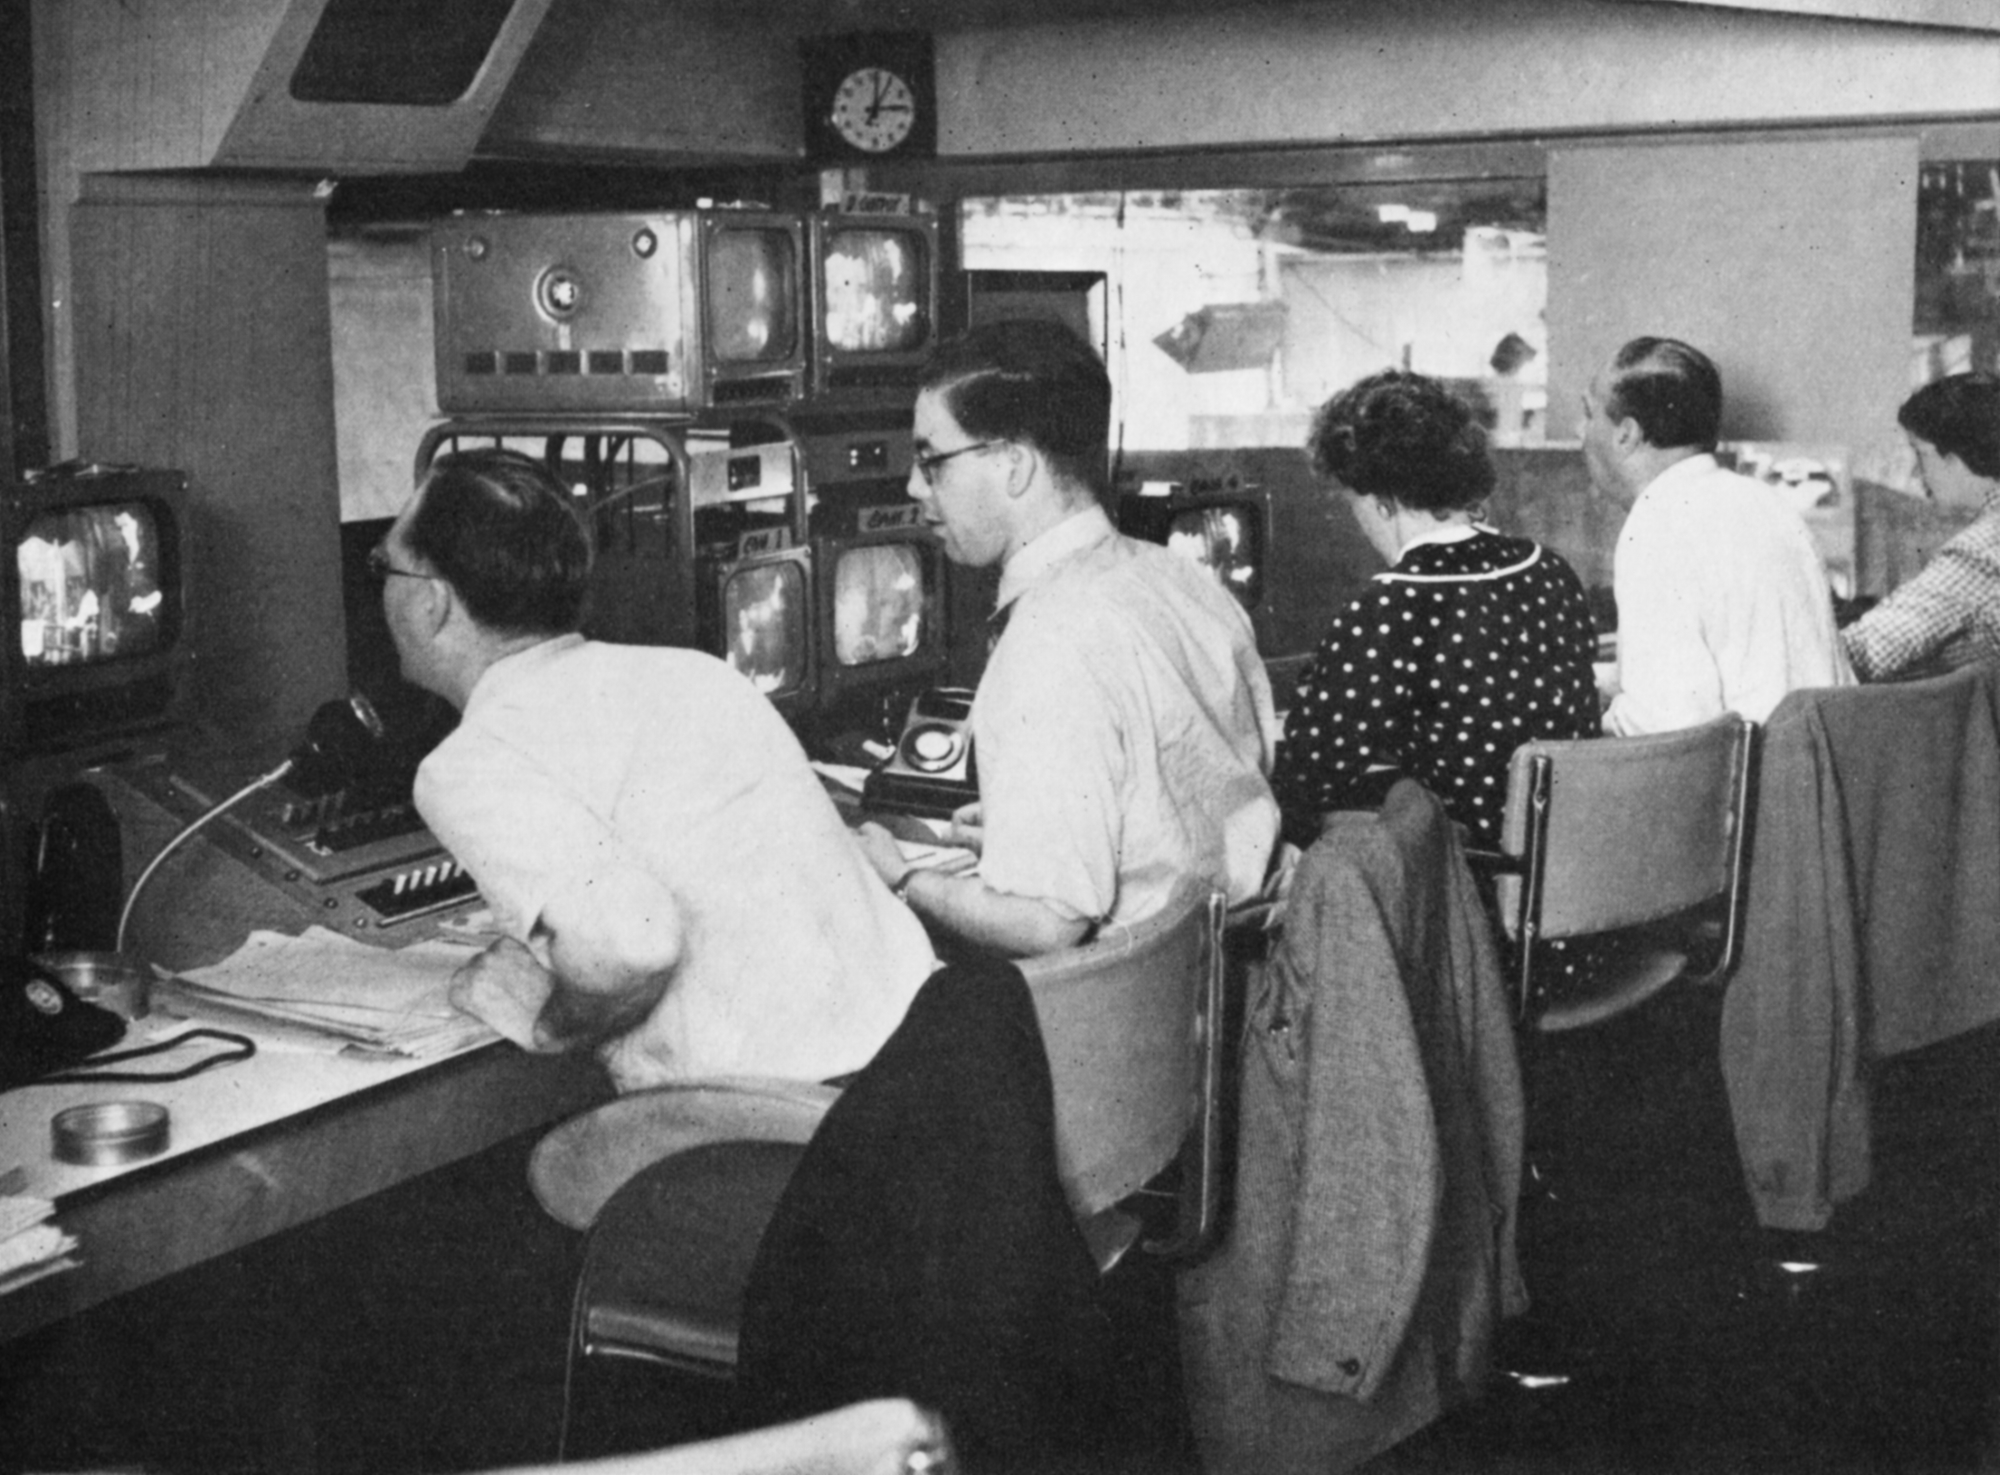 Three men and two women at a control desk covered in monitors.